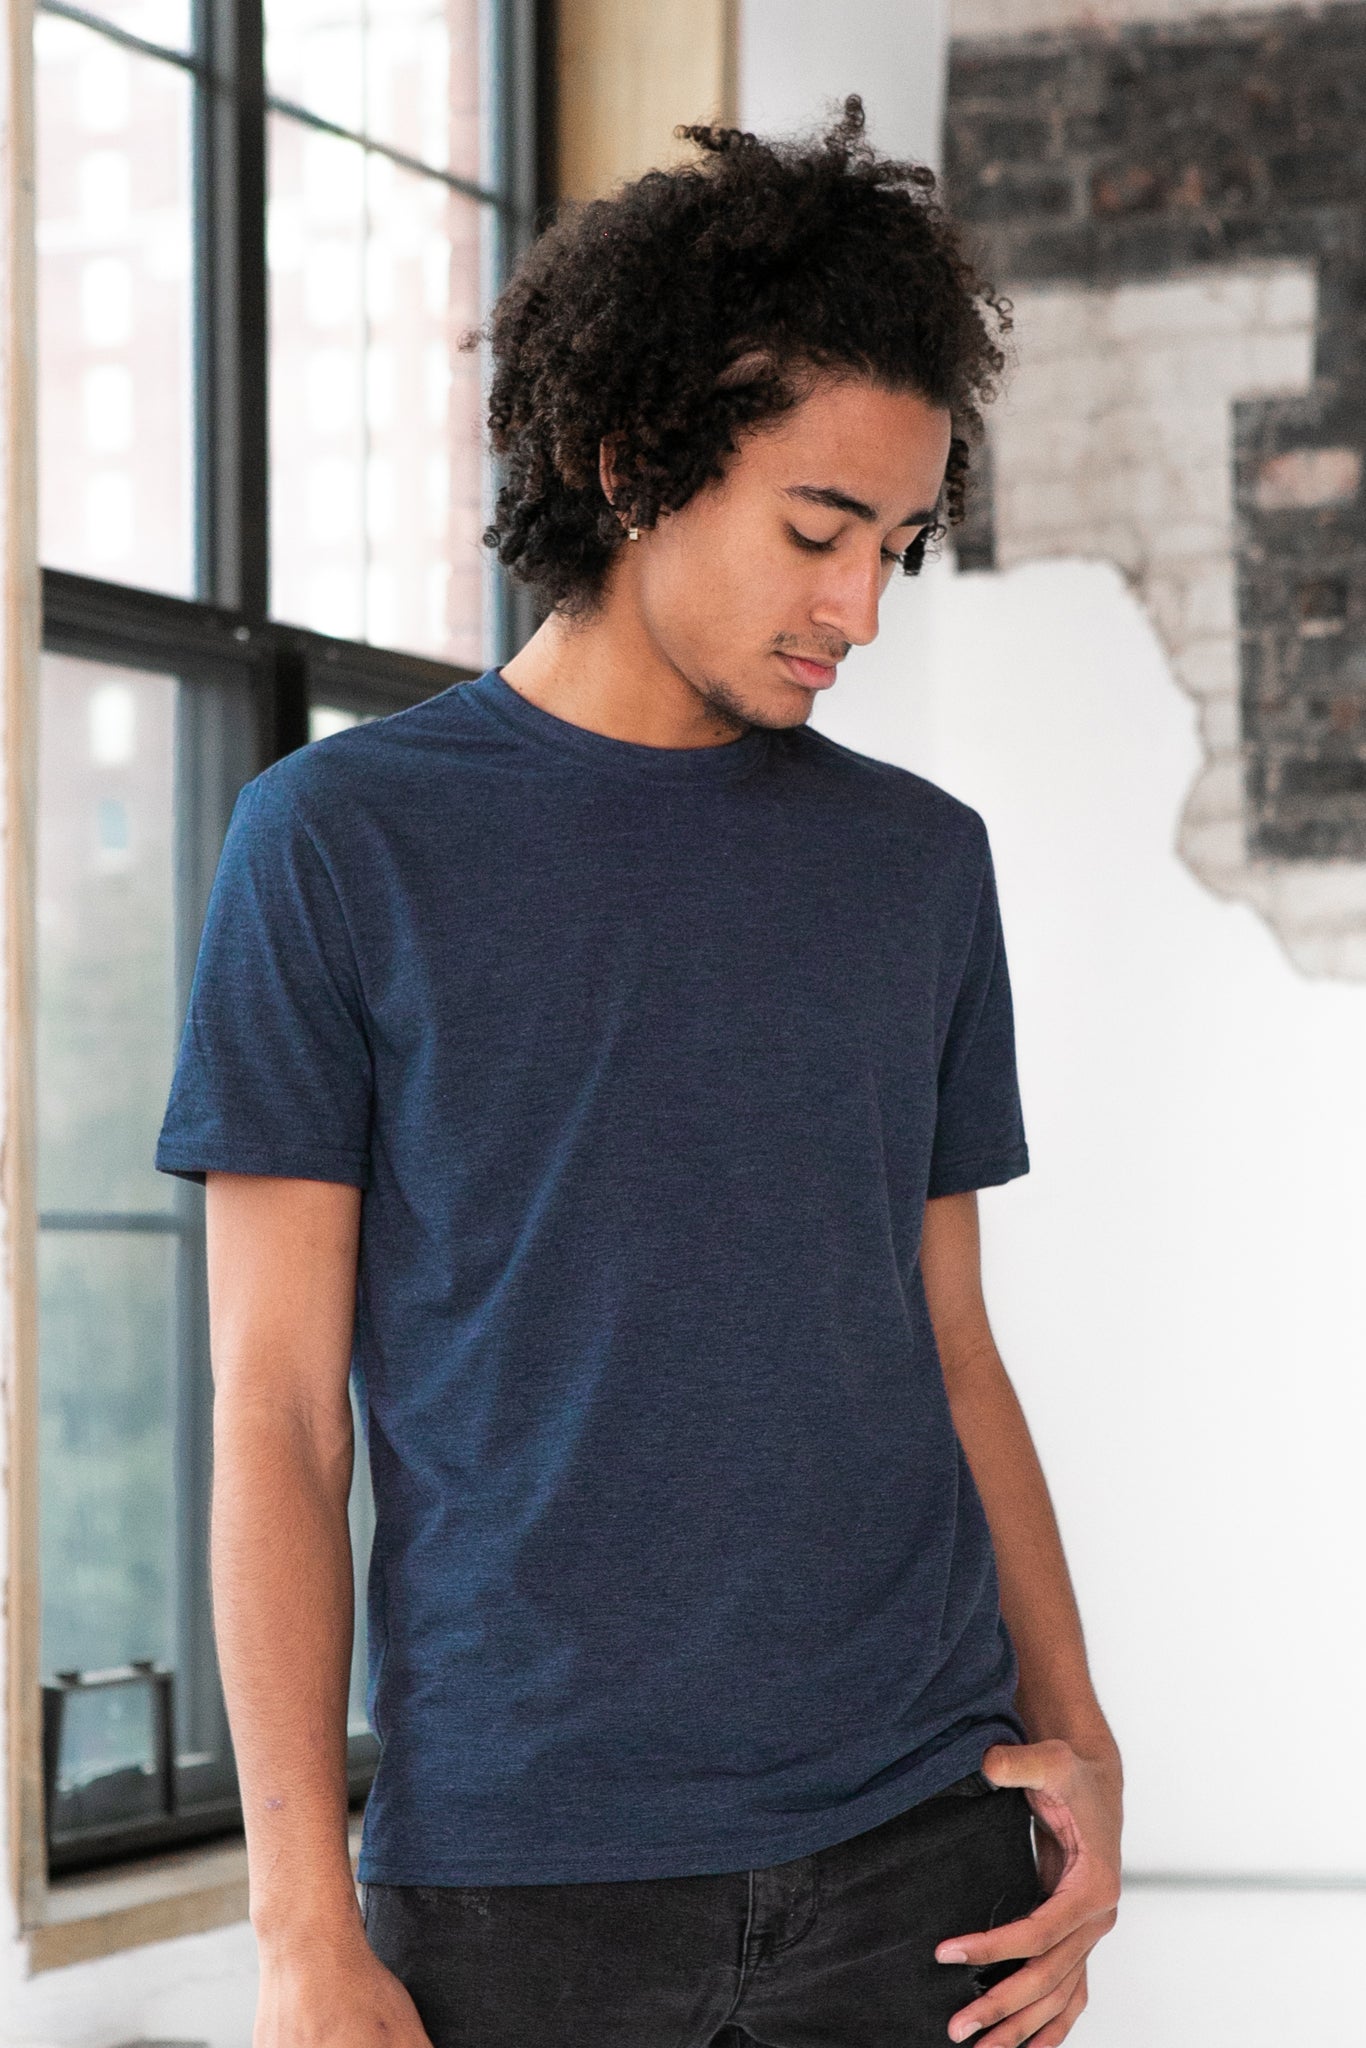 Male Model wearing GOEX Eco Triblend Unisex and Men's Tee in Navy